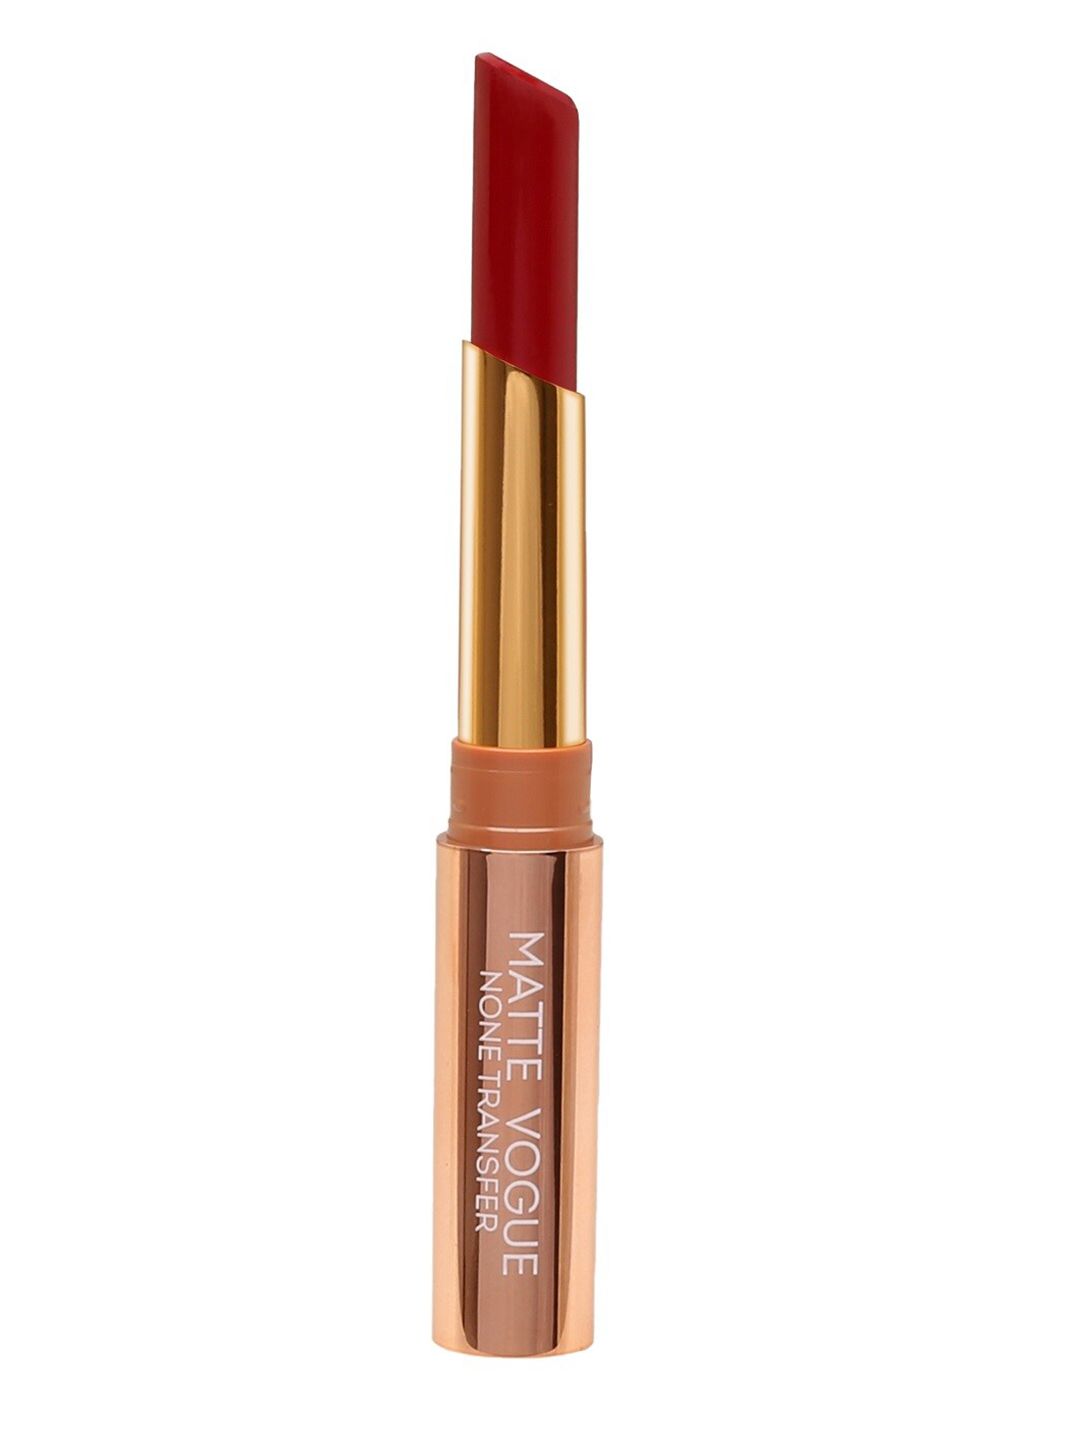 ME-ON Matte Vogue Lipstick Shade 03 - Maroon 1.8g Price in India